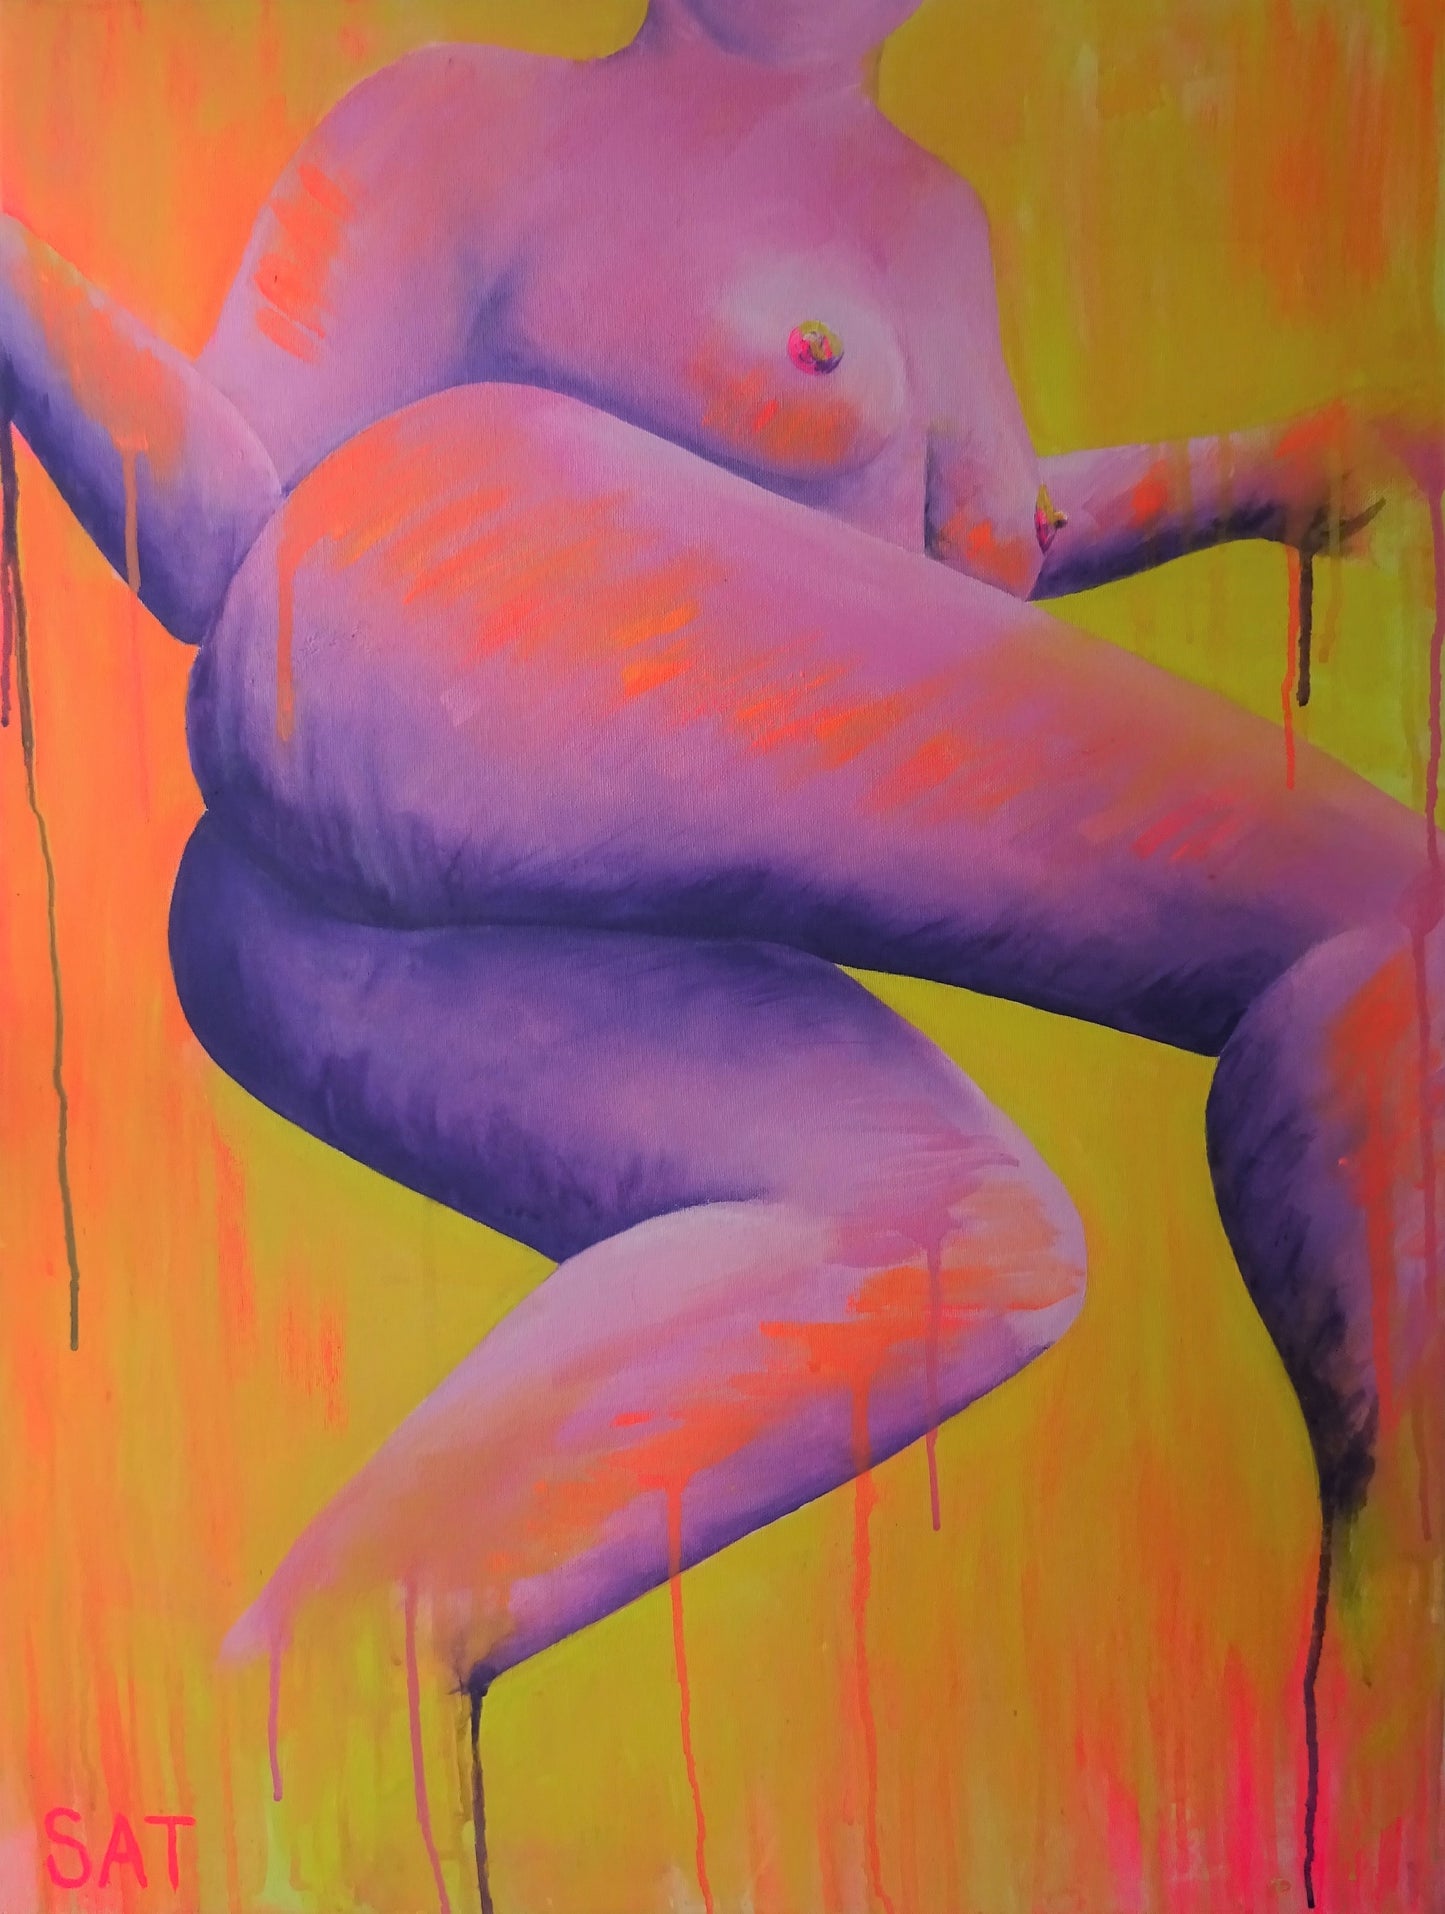 here is one of my sold contemporary pieces of artwork, the female form in bright neon colours